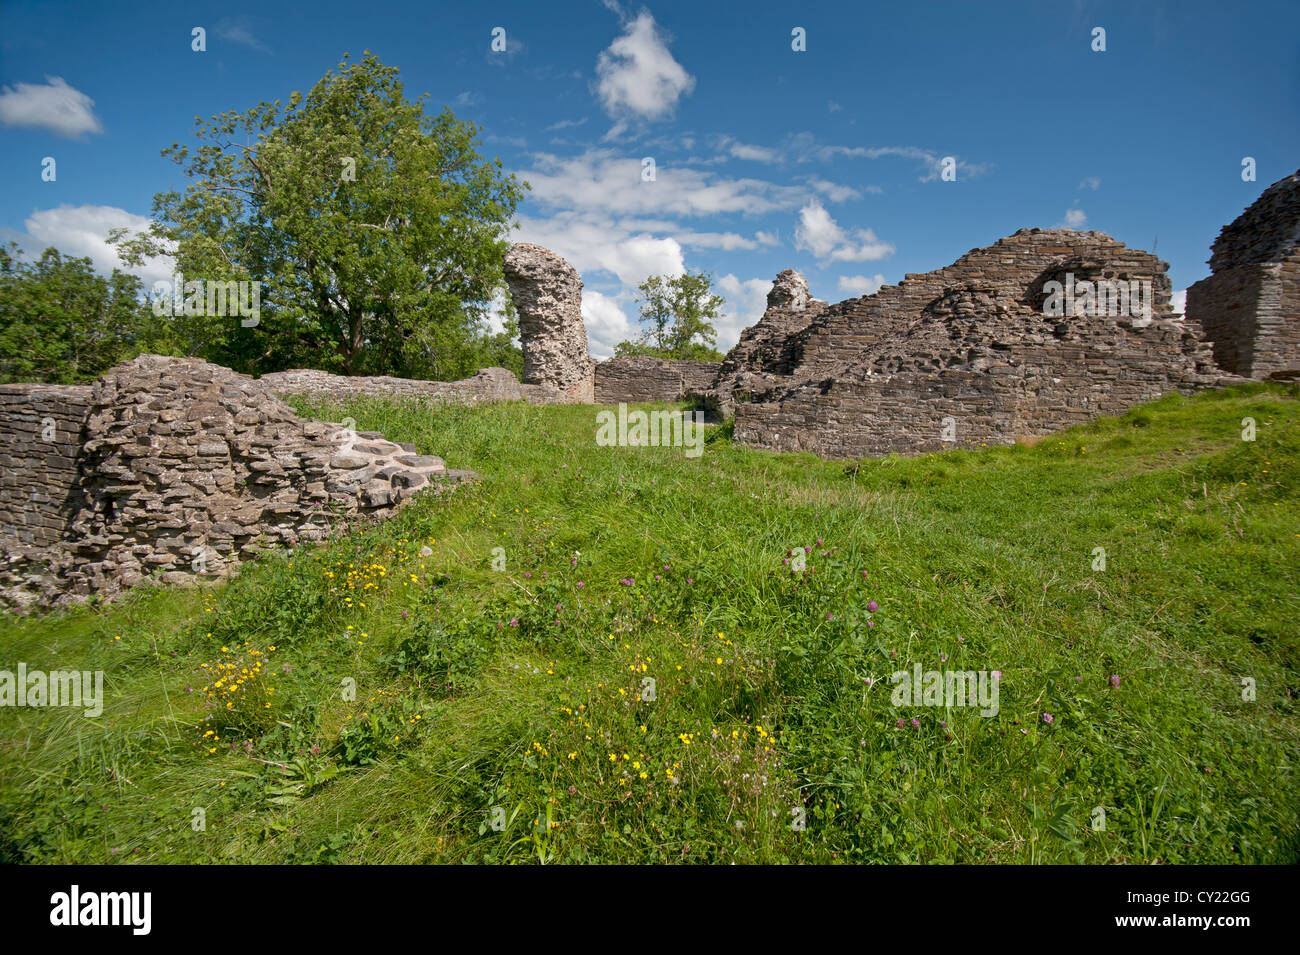 Dolforwyn Castle, recently excavated ruins in Powys, Montgomeryshire. Mid Wales.  SCO 8701 Stock Photo